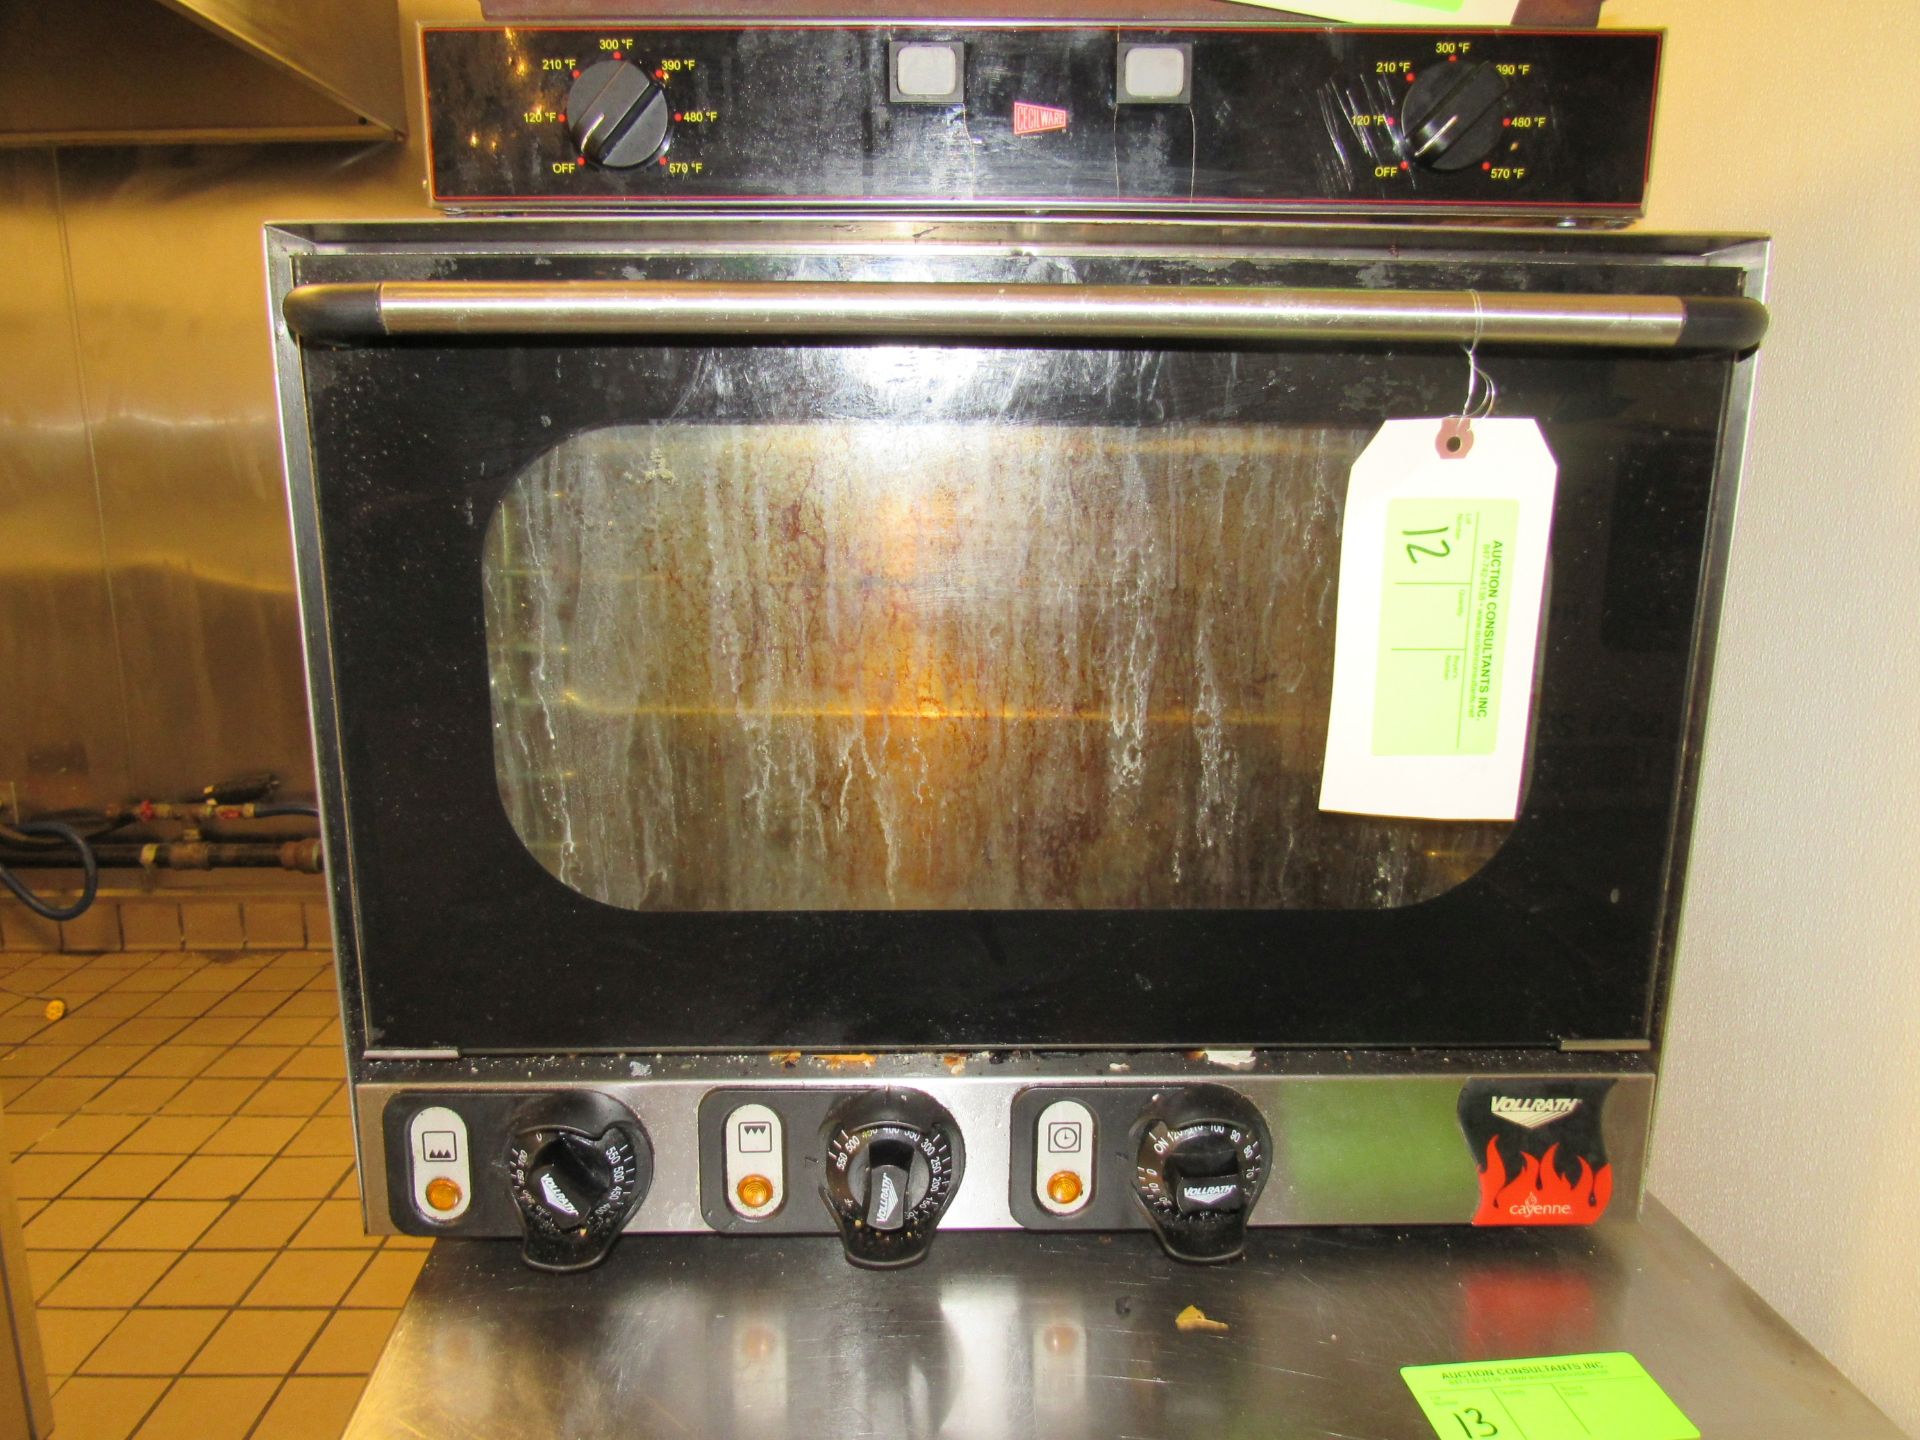 Volrath Cayenne tabletop oven